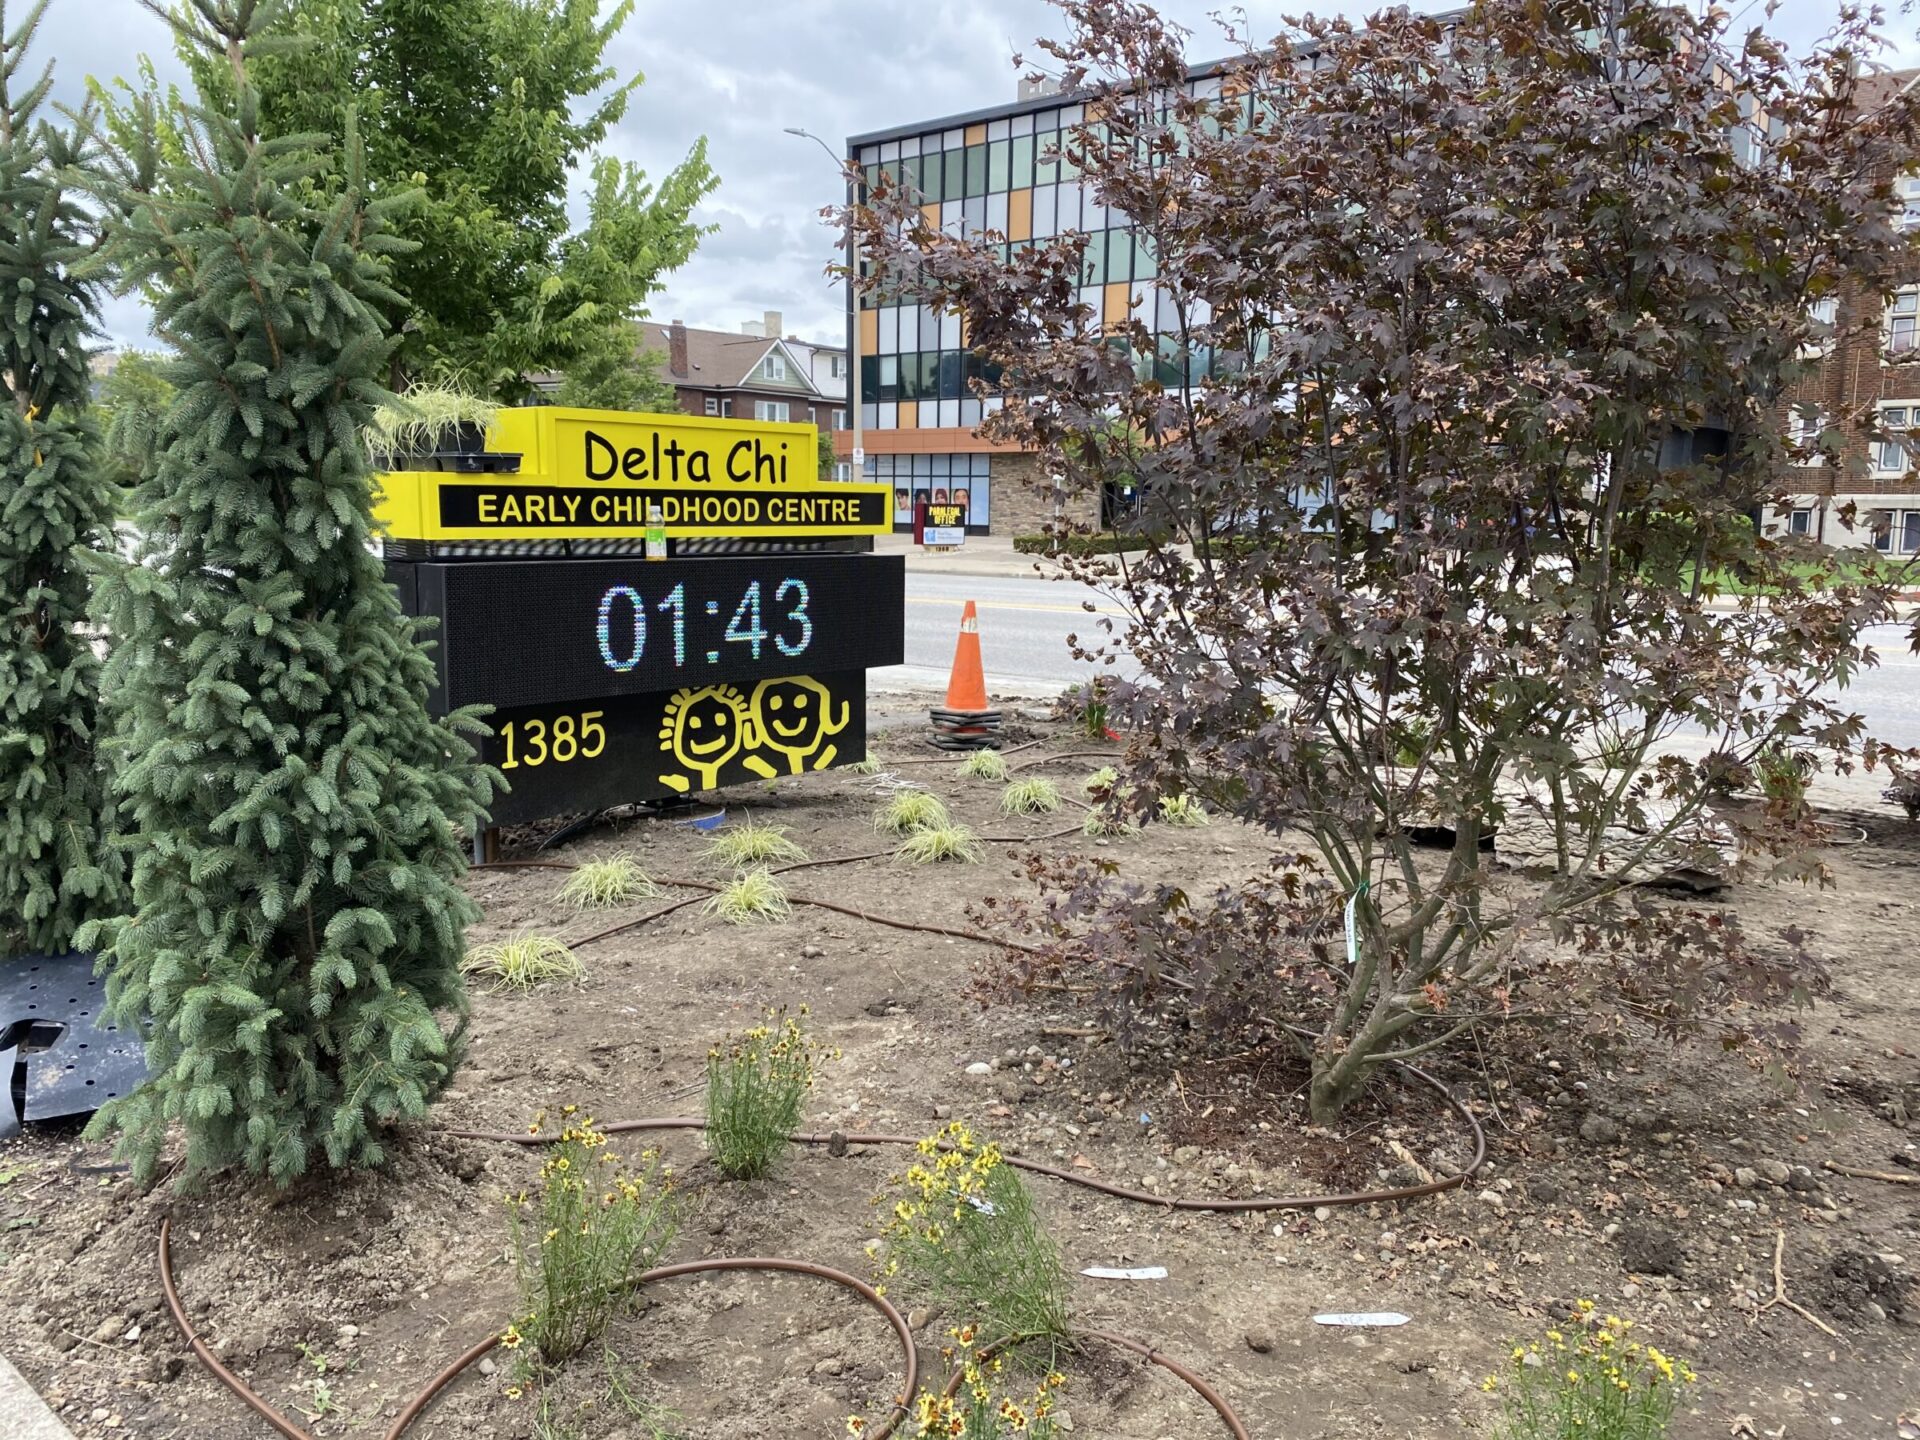 The image shows a landscaped area with a digital sign for Delta Chi Early Childhood Centre, displaying the time 01:43 with happy face emojis and vegetation around.